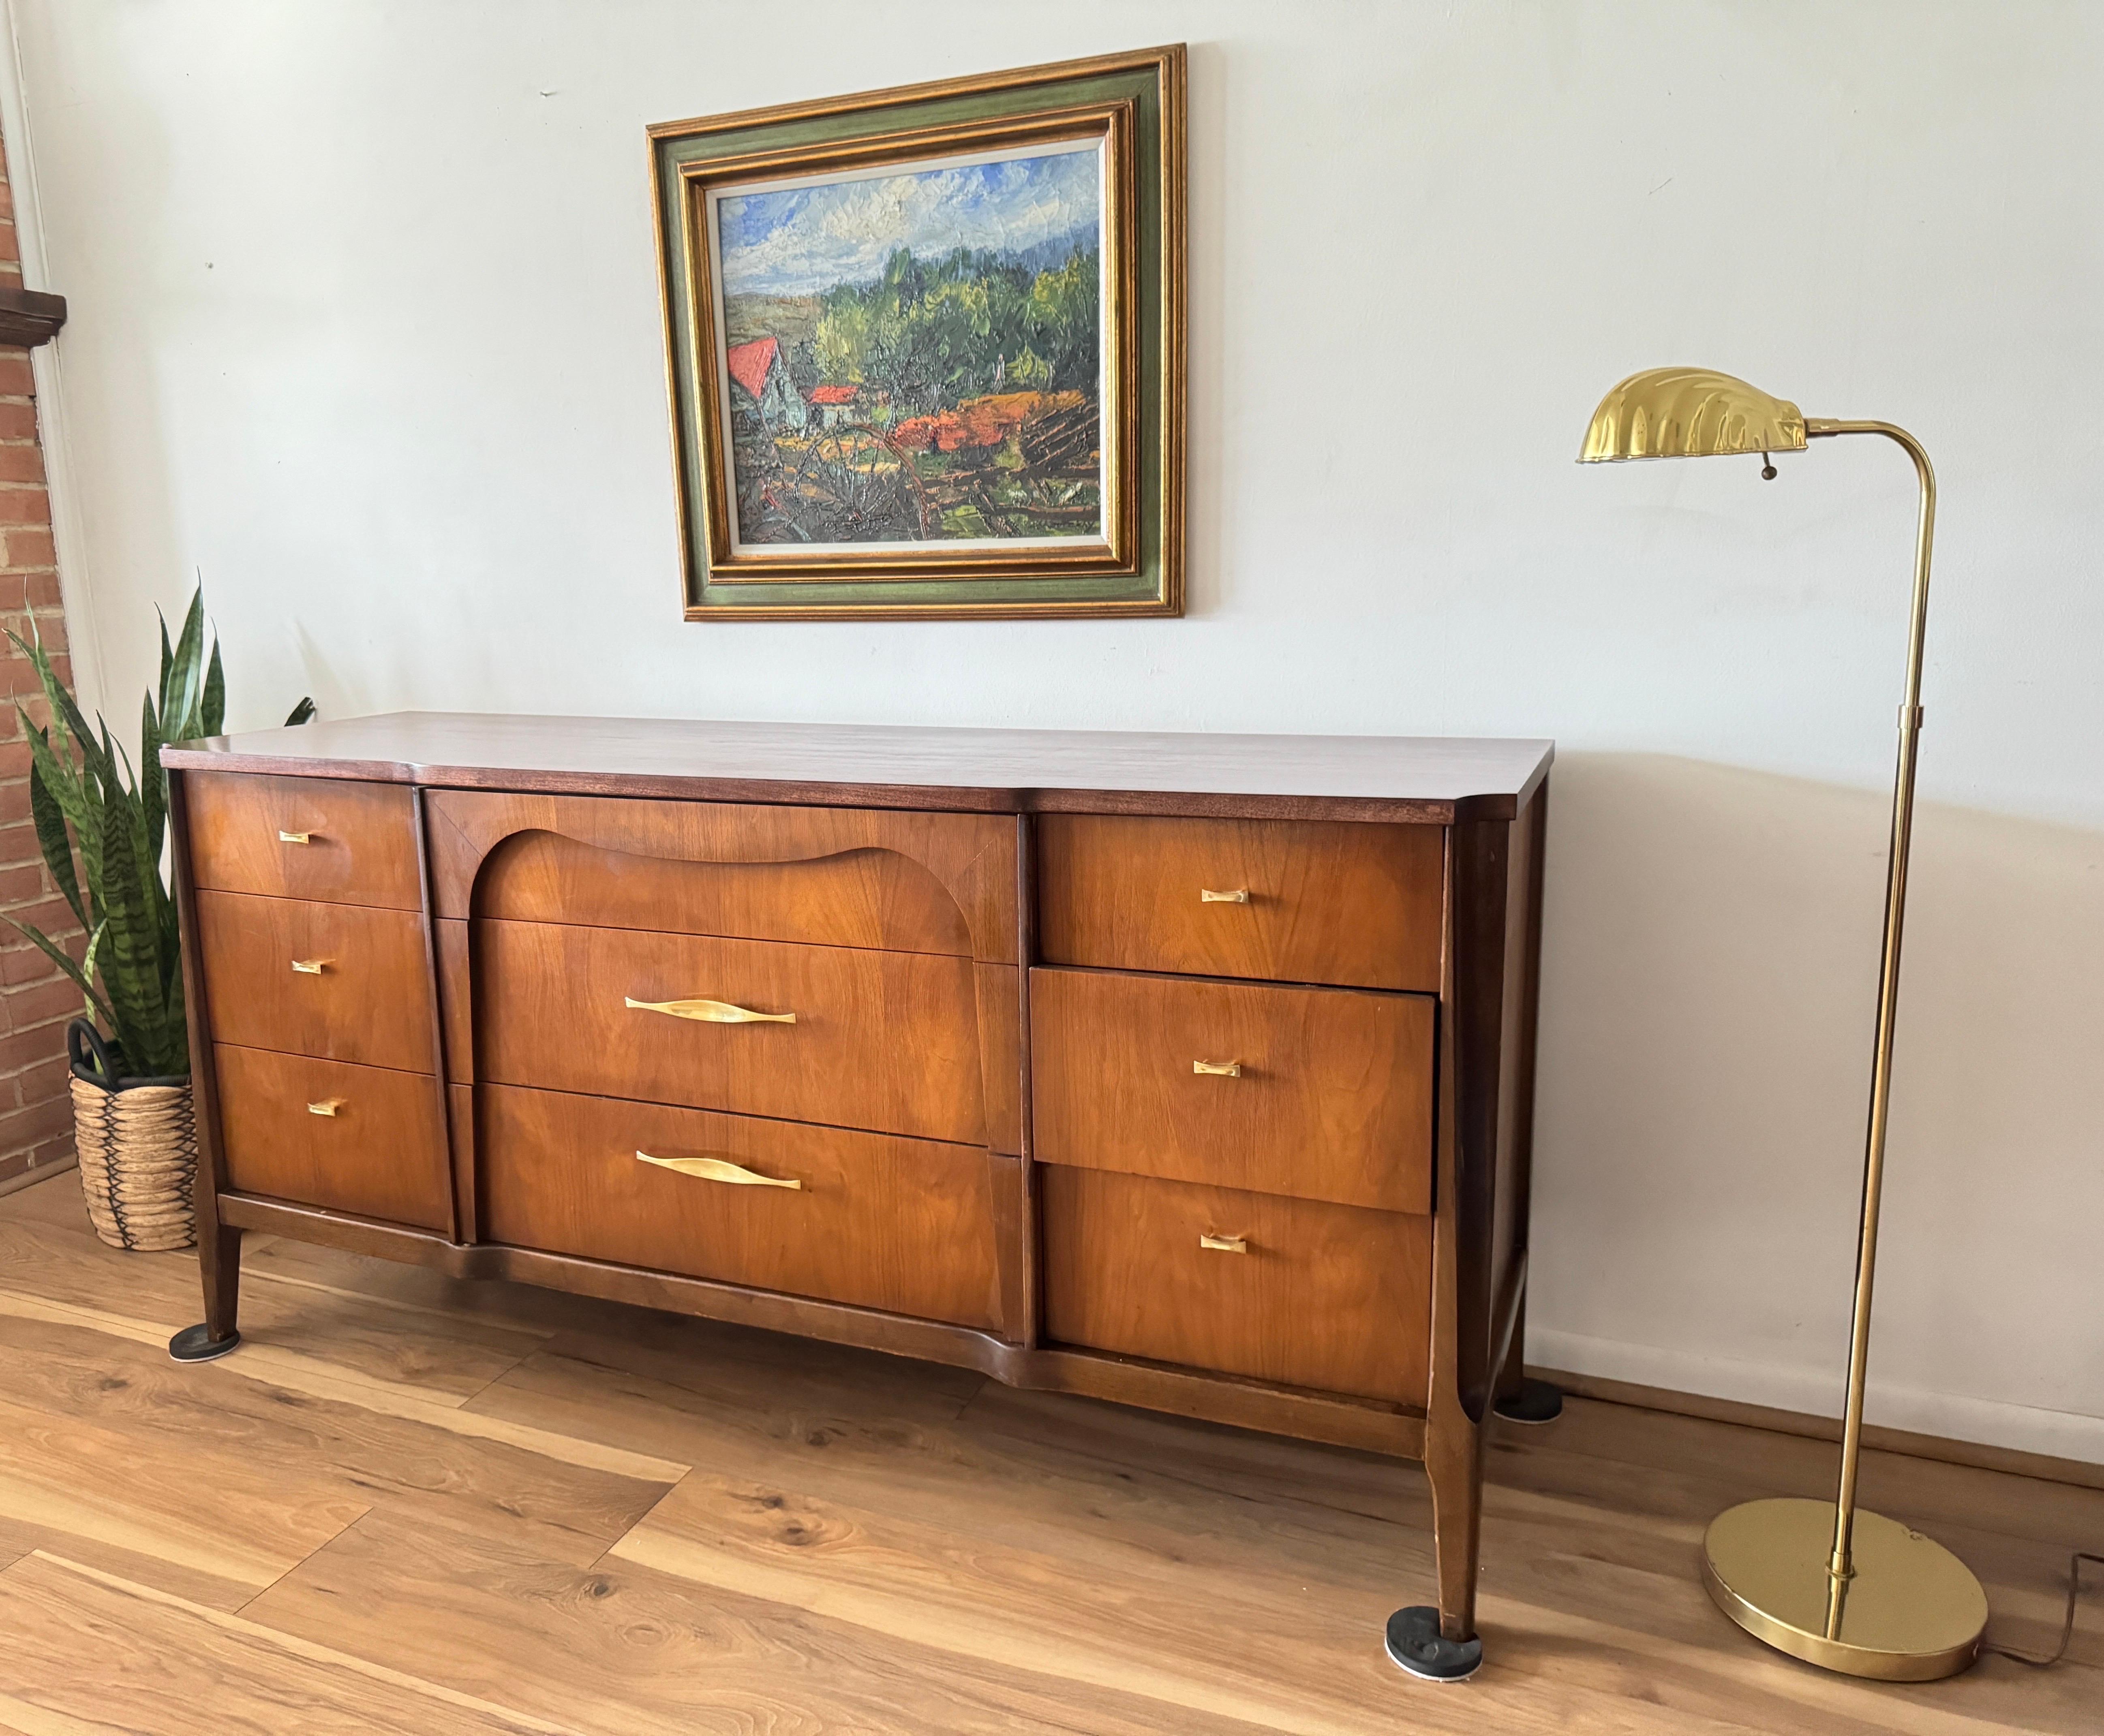 The Mid-Century Modern Broyhill Emphasis Walnut Credenza features nine pull-out drawers adorned with elegant brass handles, accentuated by intricate layered detailing on the central drawers.

